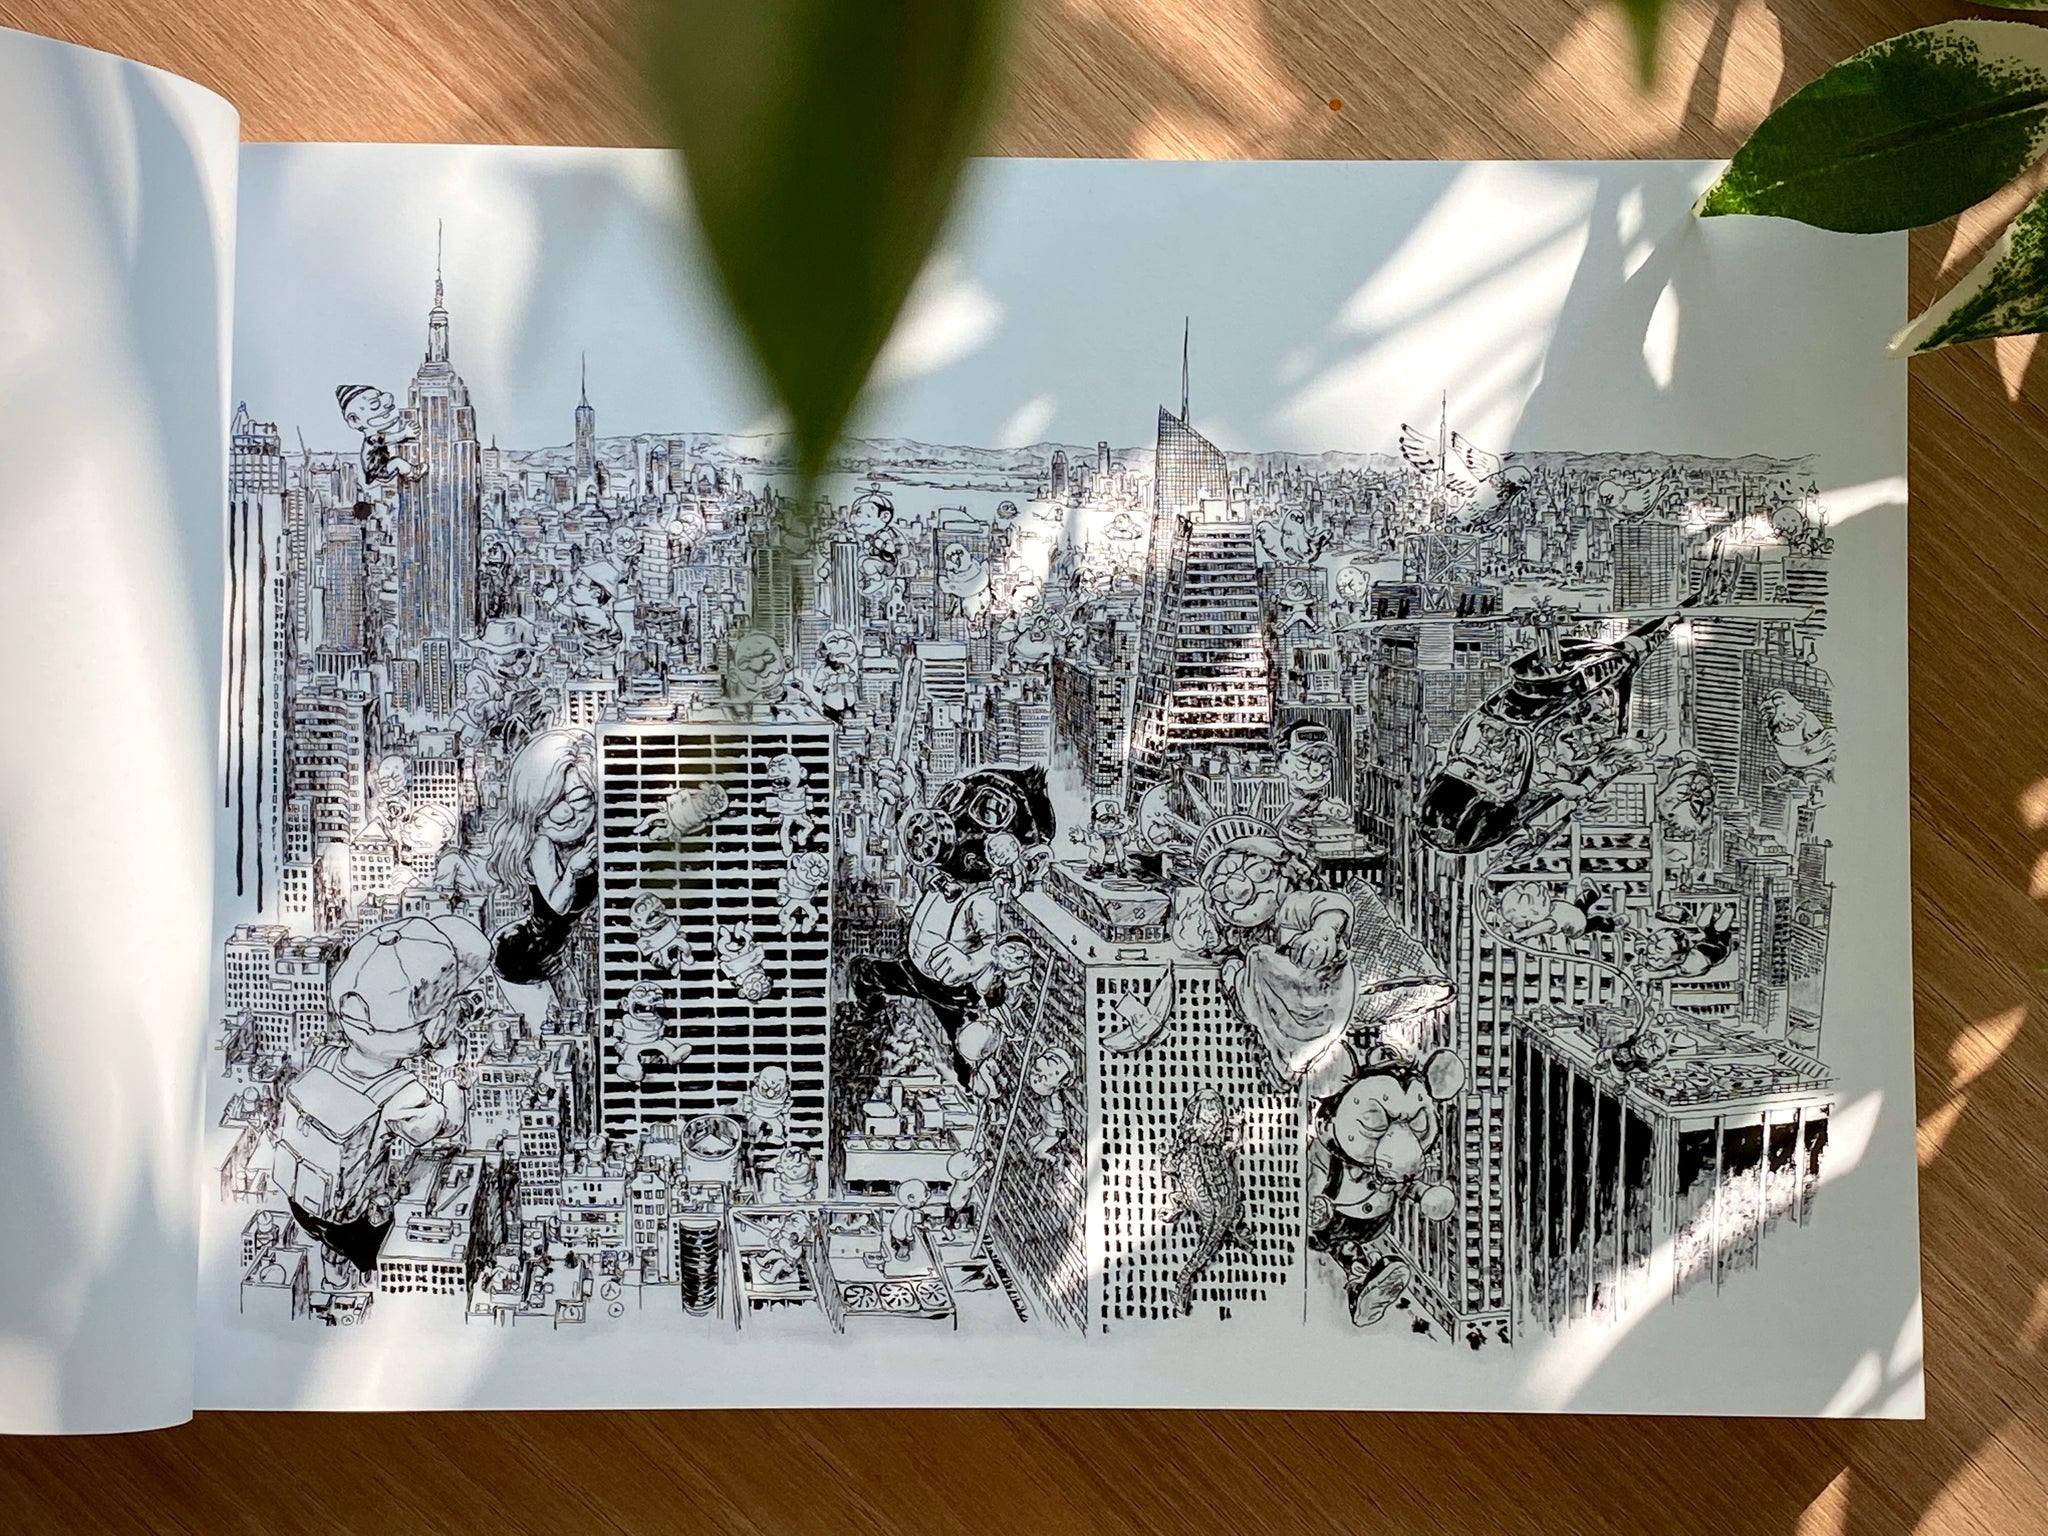 Dongho Kim's New York Sketchbook Collection